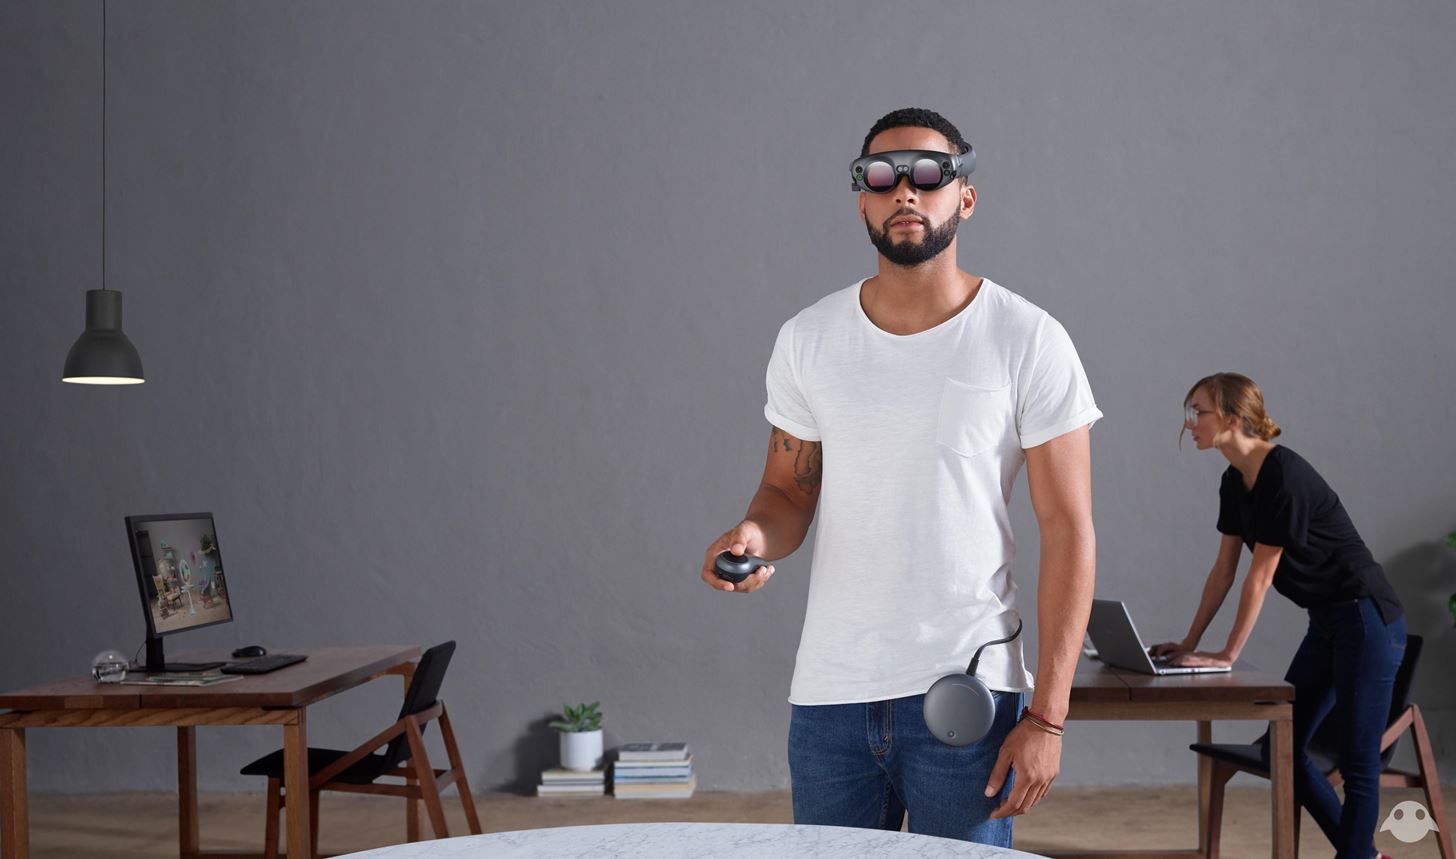 After Years of Mystery & Nearly $2 Billion Invested, Magic Leap Finally Reveals 'Creator Edition' Headset